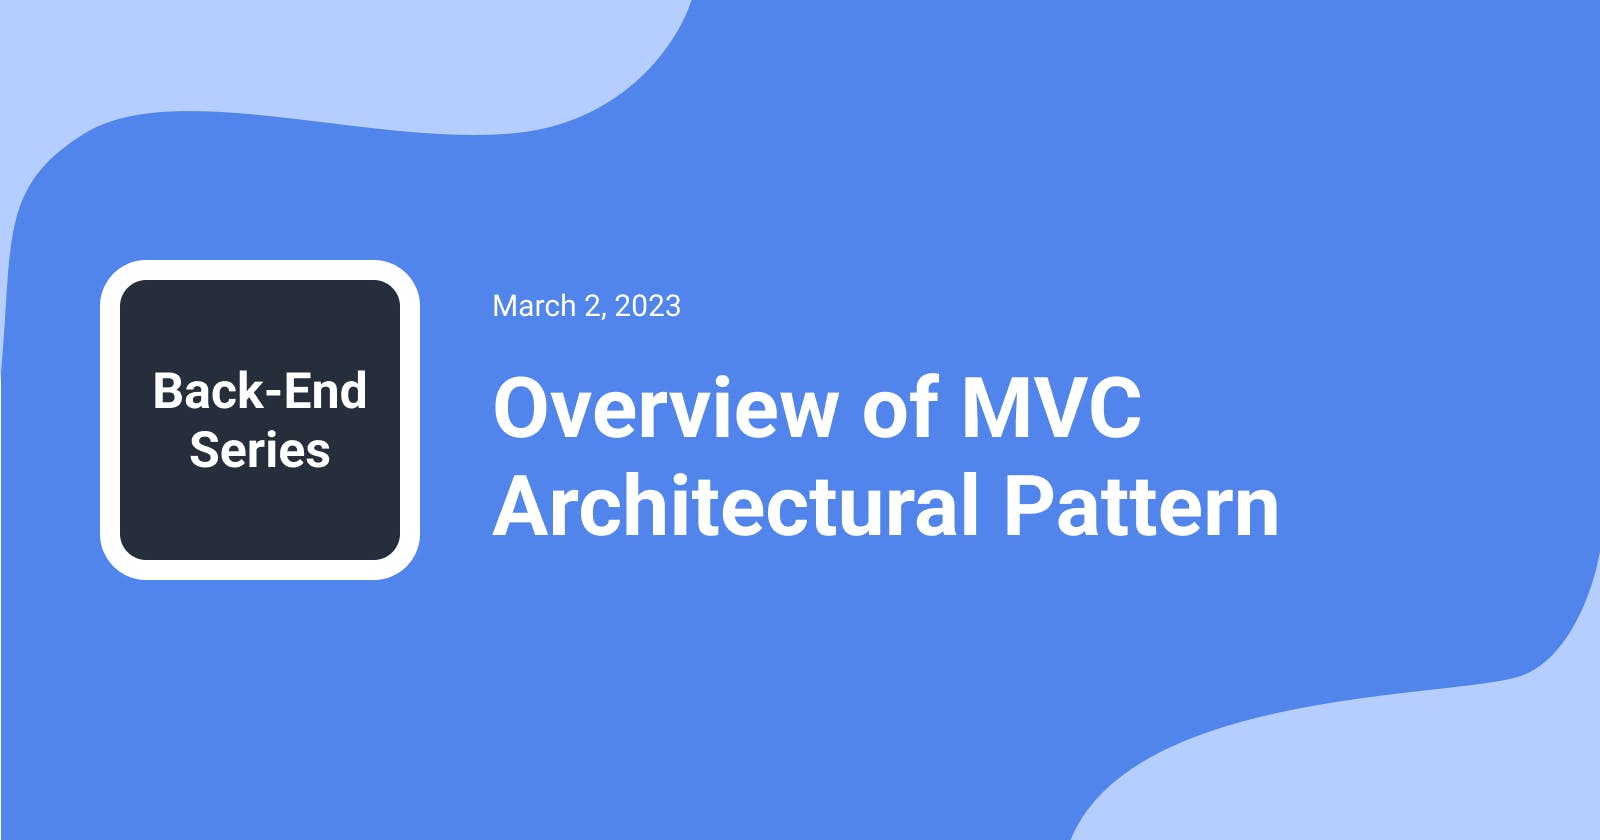 Overview of MVC Architectural Pattern